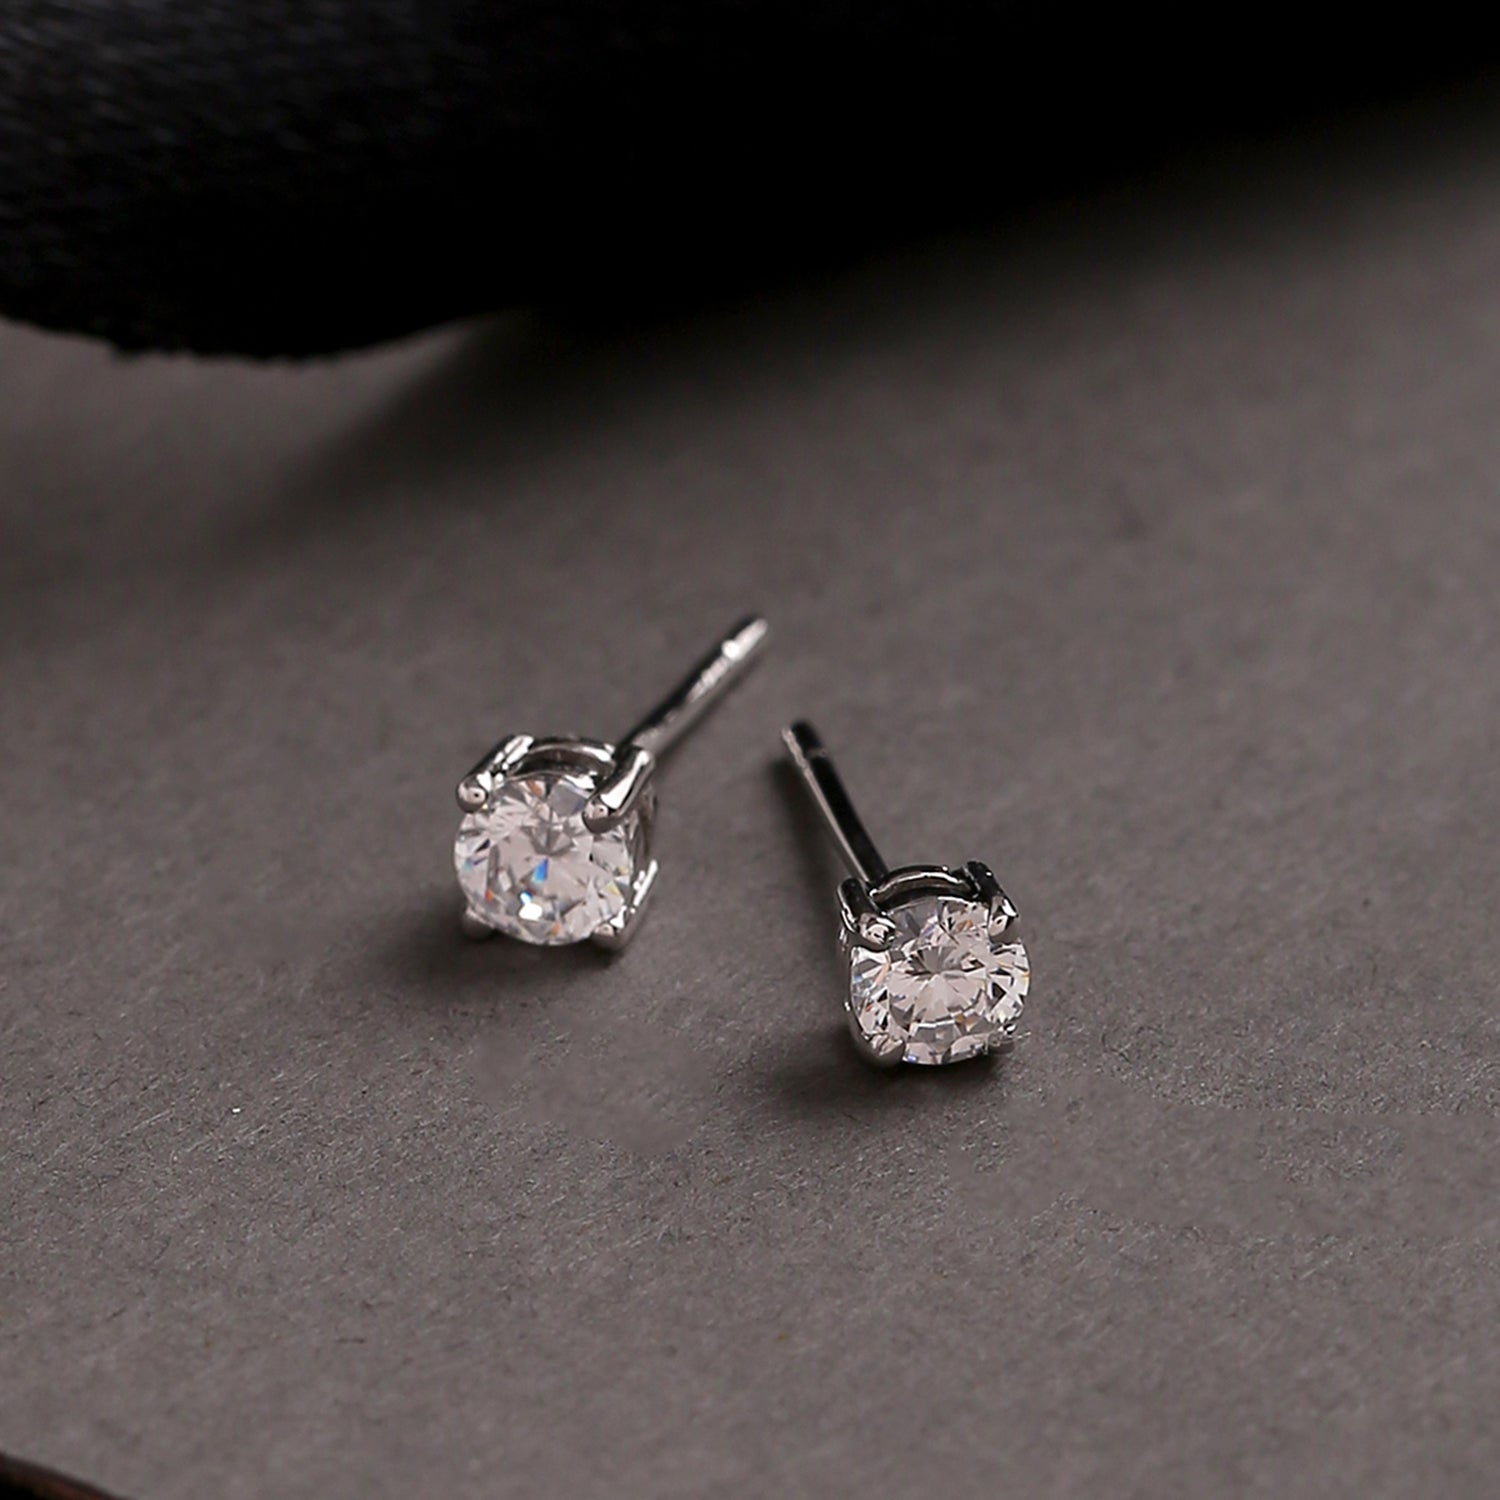 Tiny Silver Plated Stud Earrings